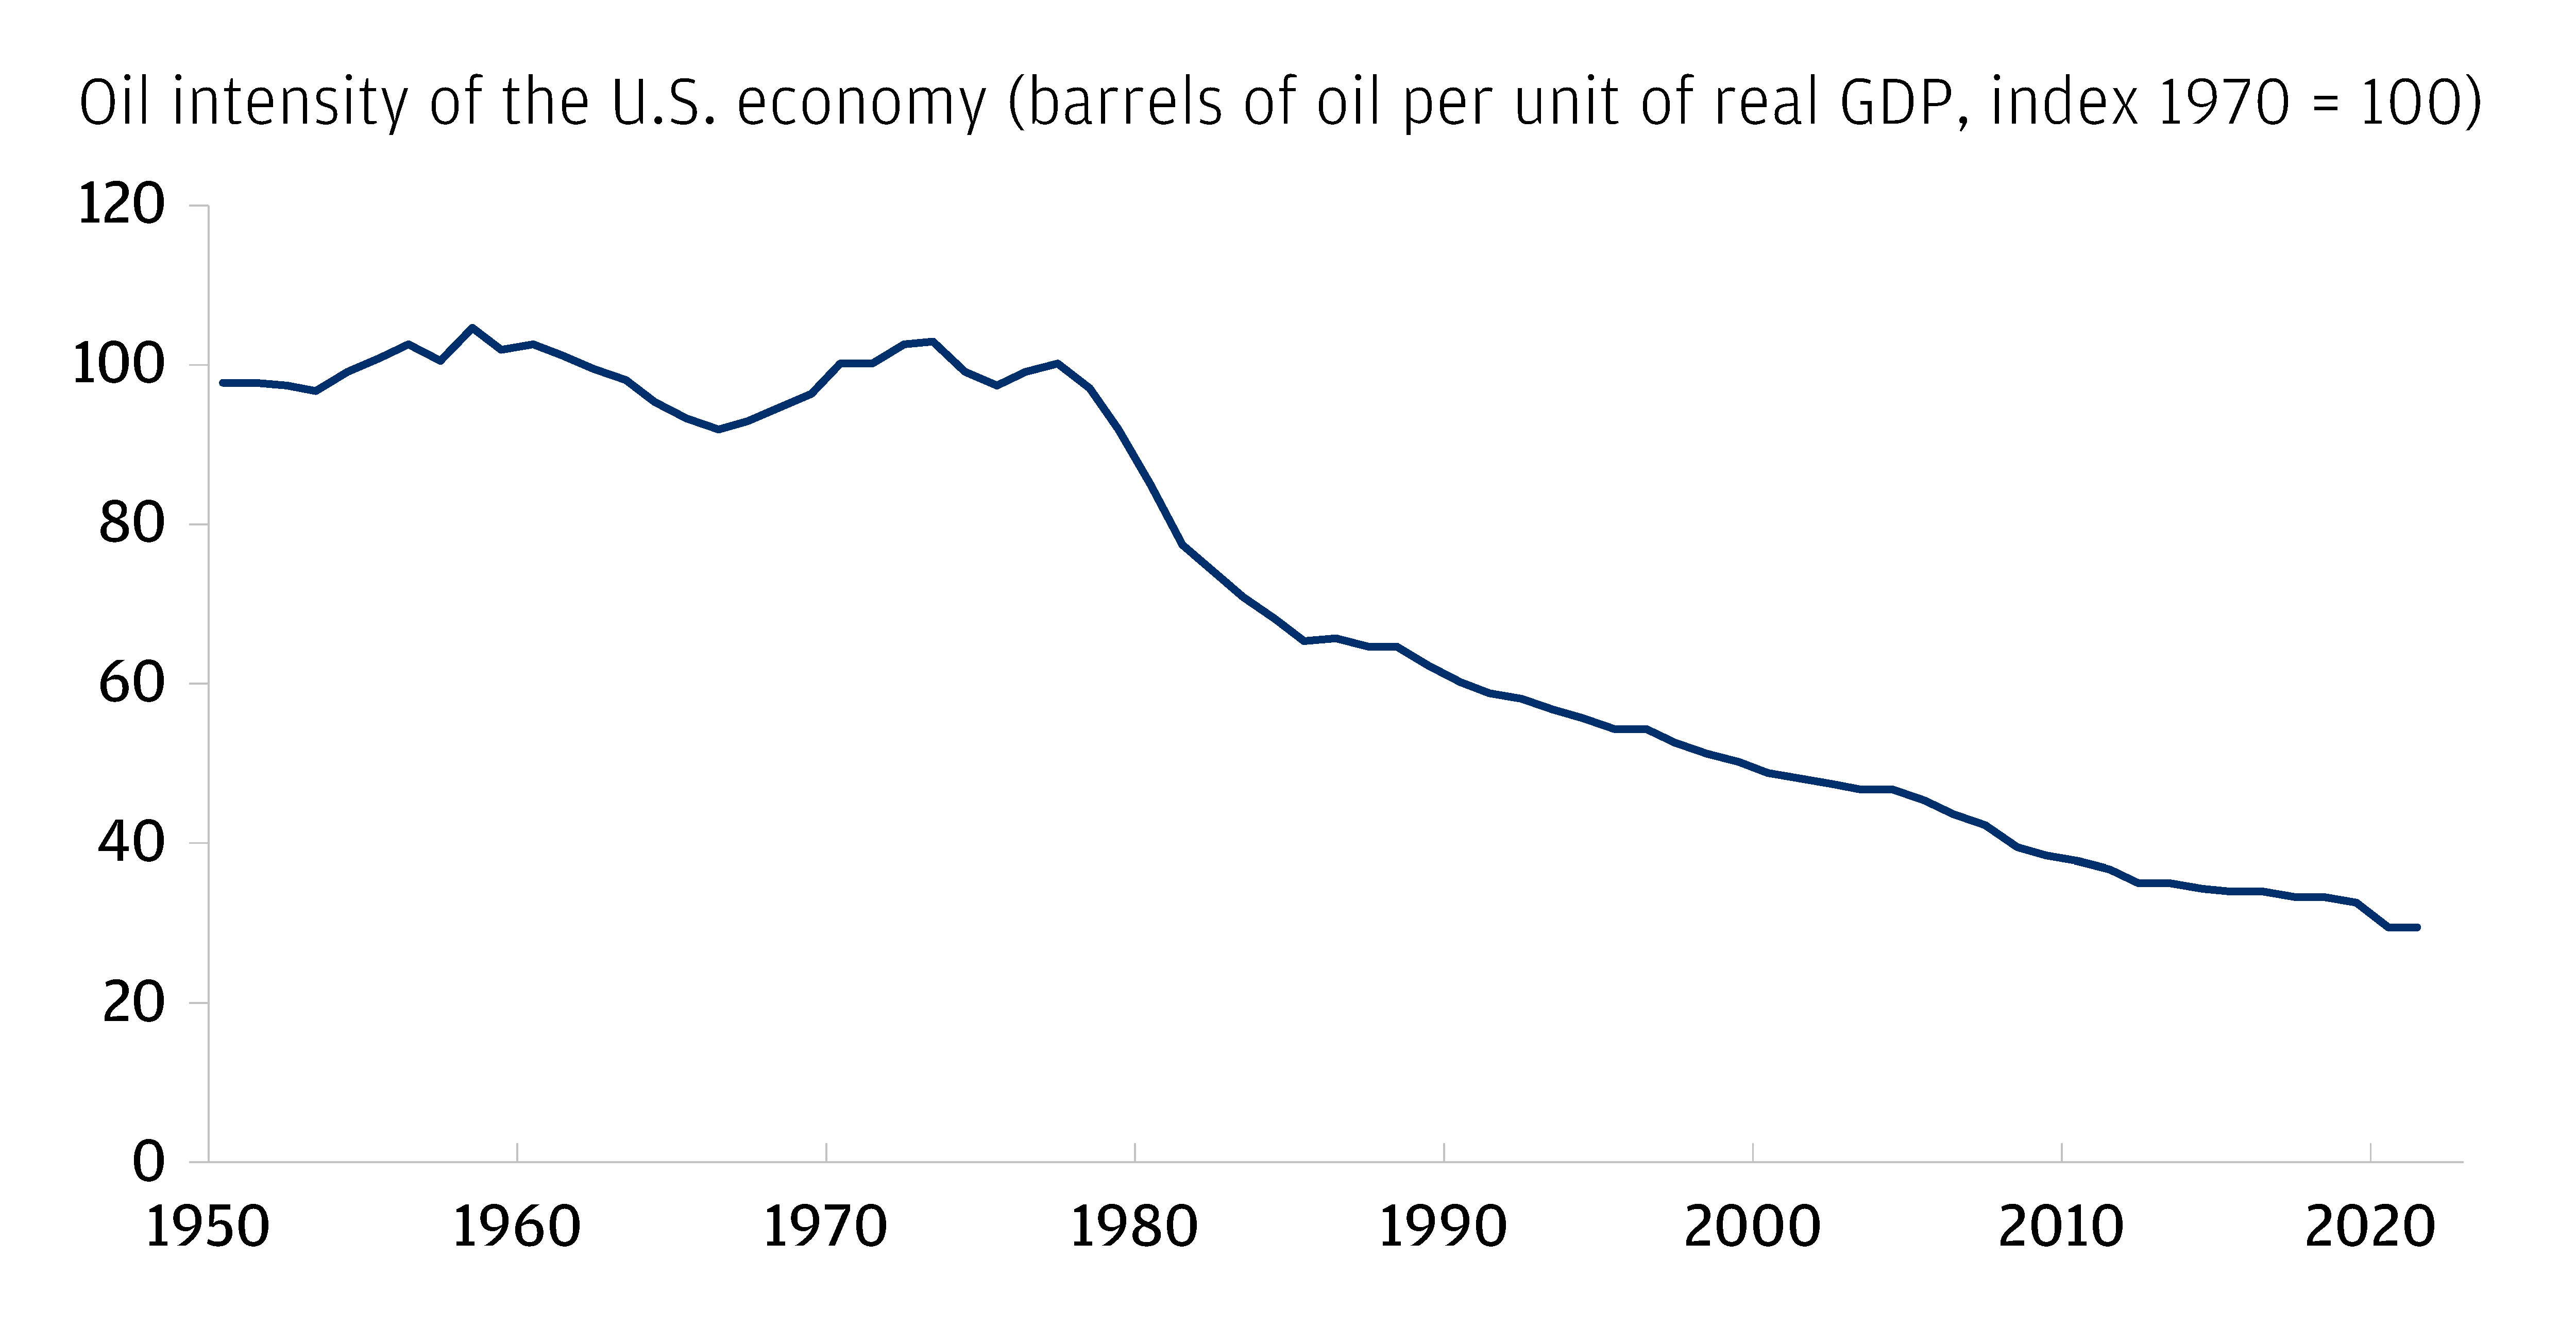 The oil intensity of the U.S. economy continues to fall. This line graph shows the oil intensity of the U.S. economy (measured as barrels of oil per unit of GDP, indexed 1970 = 100) from 1950 to present. As shown in the chart, the oil intensity of the U.S. economy has dropped dramatically to almost a third of its high levels in the 1970s.